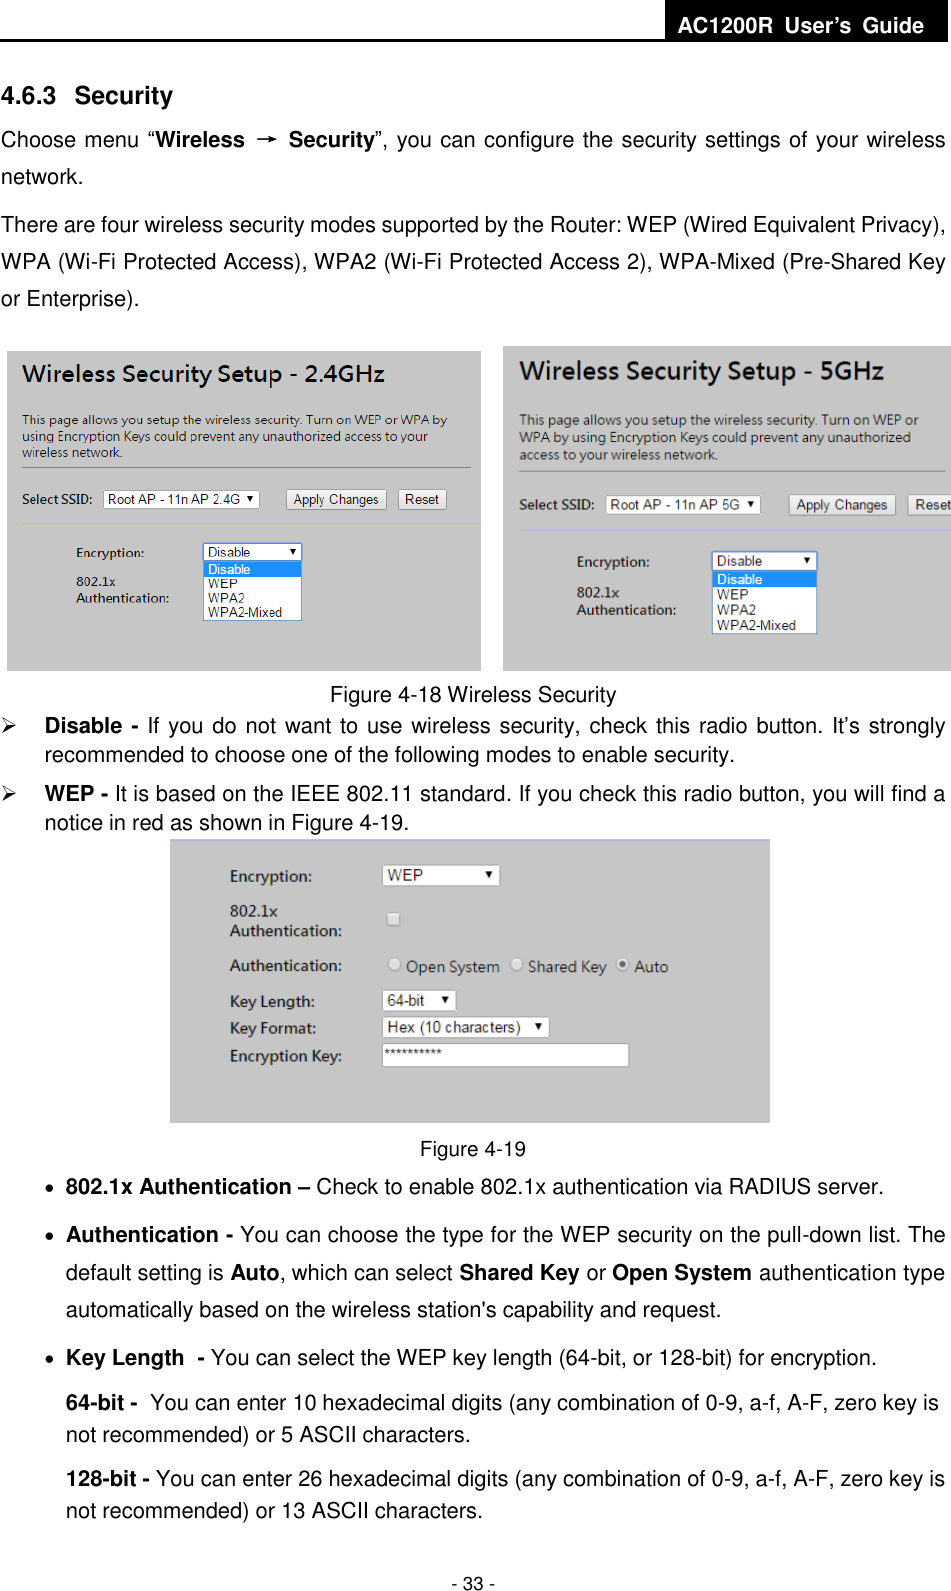  AC1200R  User’s  Guide  - 33 - 4.6.3  Security Choose menu “Wireless  →  Security”, you can configure the security settings of your wireless network. There are four wireless security modes supported by the Router: WEP (Wired Equivalent Privacy), WPA (Wi-Fi Protected Access), WPA2 (Wi-Fi Protected Access 2), WPA-Mixed (Pre-Shared Key or Enterprise). Figure 4-18 Wireless Security  Disable - If you do not want to use wireless security, check this radio button. It’s strongly recommended to choose one of the following modes to enable security.  WEP - It is based on the IEEE 802.11 standard. If you check this radio button, you will find a notice in red as shown in Figure 4-19.    Figure 4-19  802.1x Authentication – Check to enable 802.1x authentication via RADIUS server.    Authentication - You can choose the type for the WEP security on the pull-down list. The default setting is Auto, which can select Shared Key or Open System authentication type automatically based on the wireless station&apos;s capability and request.  Key Length - You can select the WEP key length (64-bit, or 128-bit) for encryption.   64-bit - You can enter 10 hexadecimal digits (any combination of 0-9, a-f, A-F, zero key is not recommended) or 5 ASCII characters.   128-bit - You can enter 26 hexadecimal digits (any combination of 0-9, a-f, A-F, zero key is not recommended) or 13 ASCII characters.   